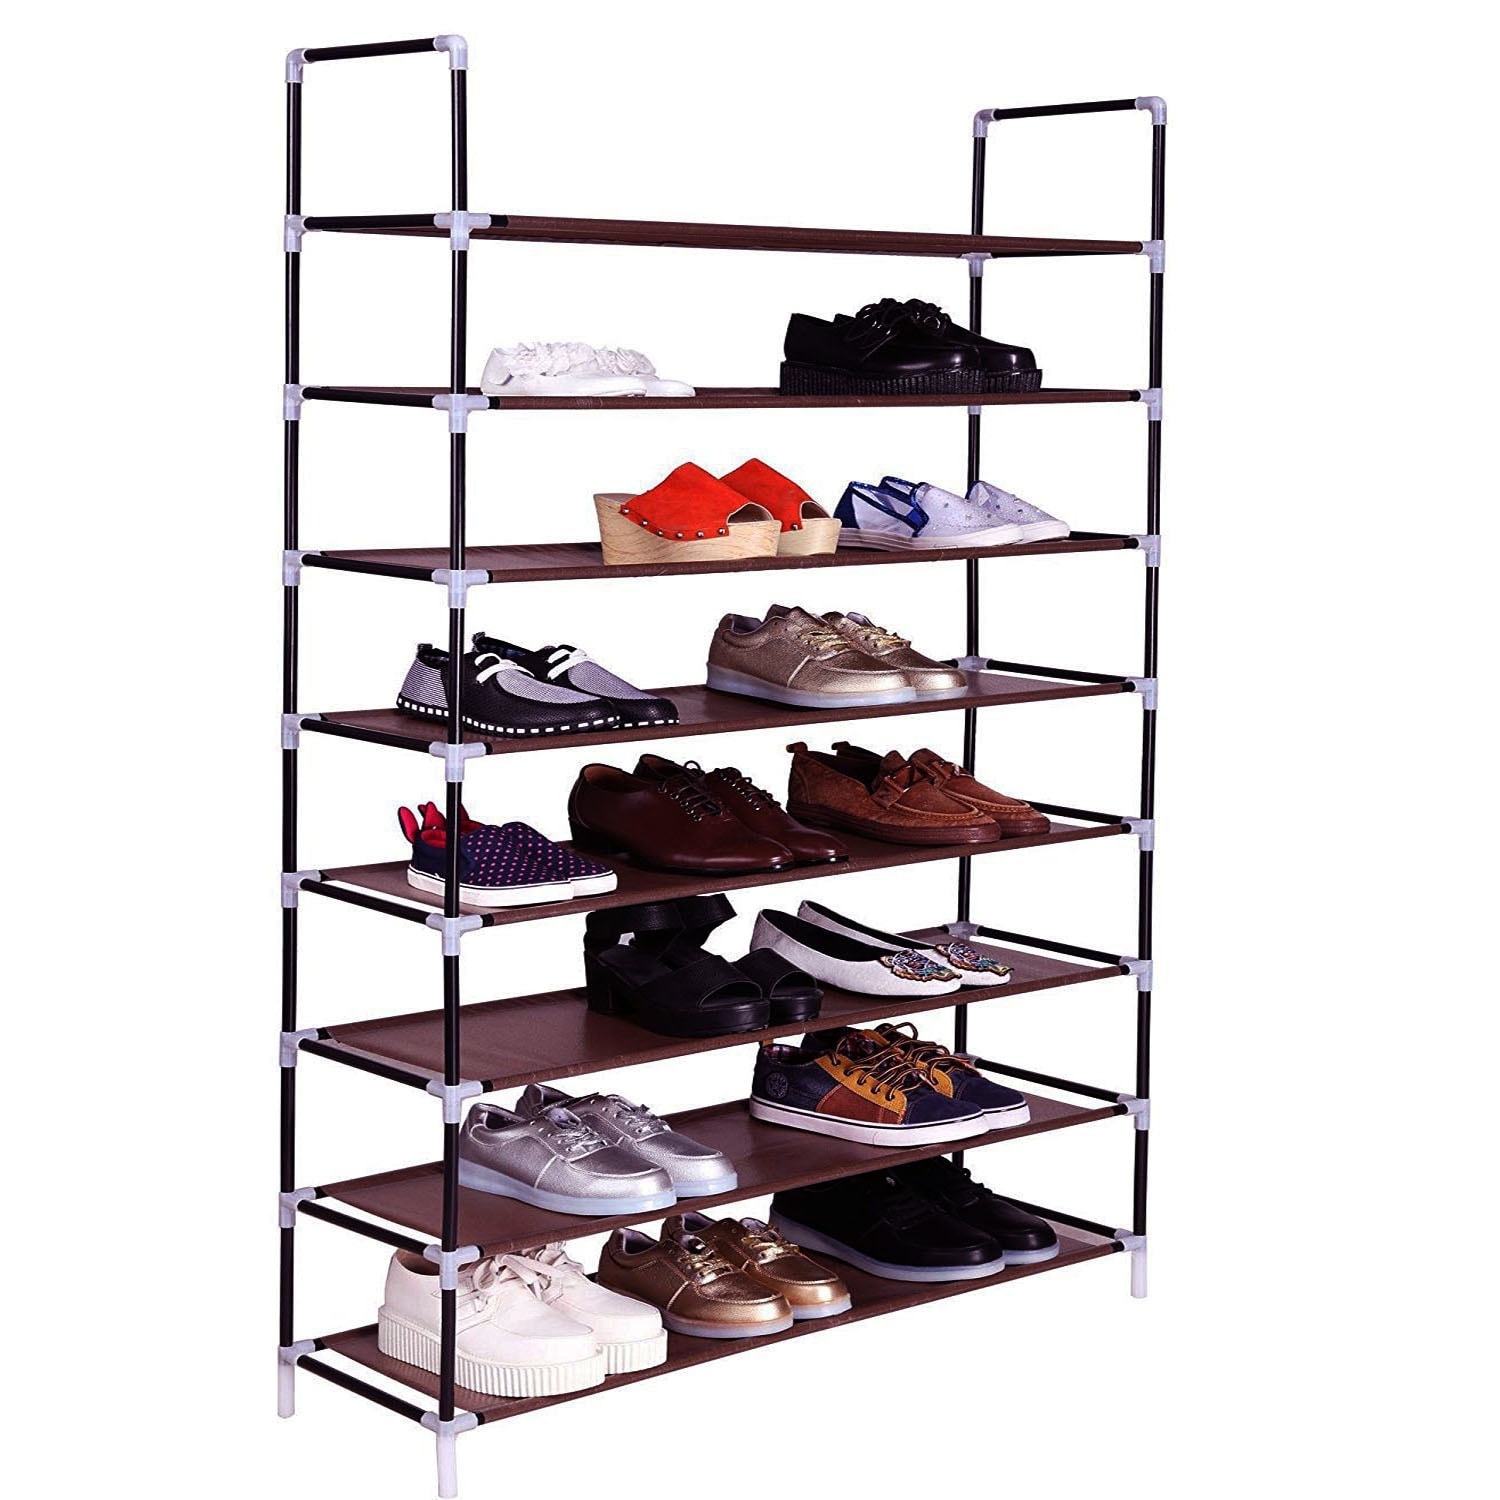 https://ak1.ostkcdn.com/images/products/is/images/direct/a0565eedc32ce4287e2aa99ee74d0432700501ba/Simple-Extra-Wide-Non-woven-Fabric-Shoe-Rack-with-Handle-5-8-10-Tiers.jpg